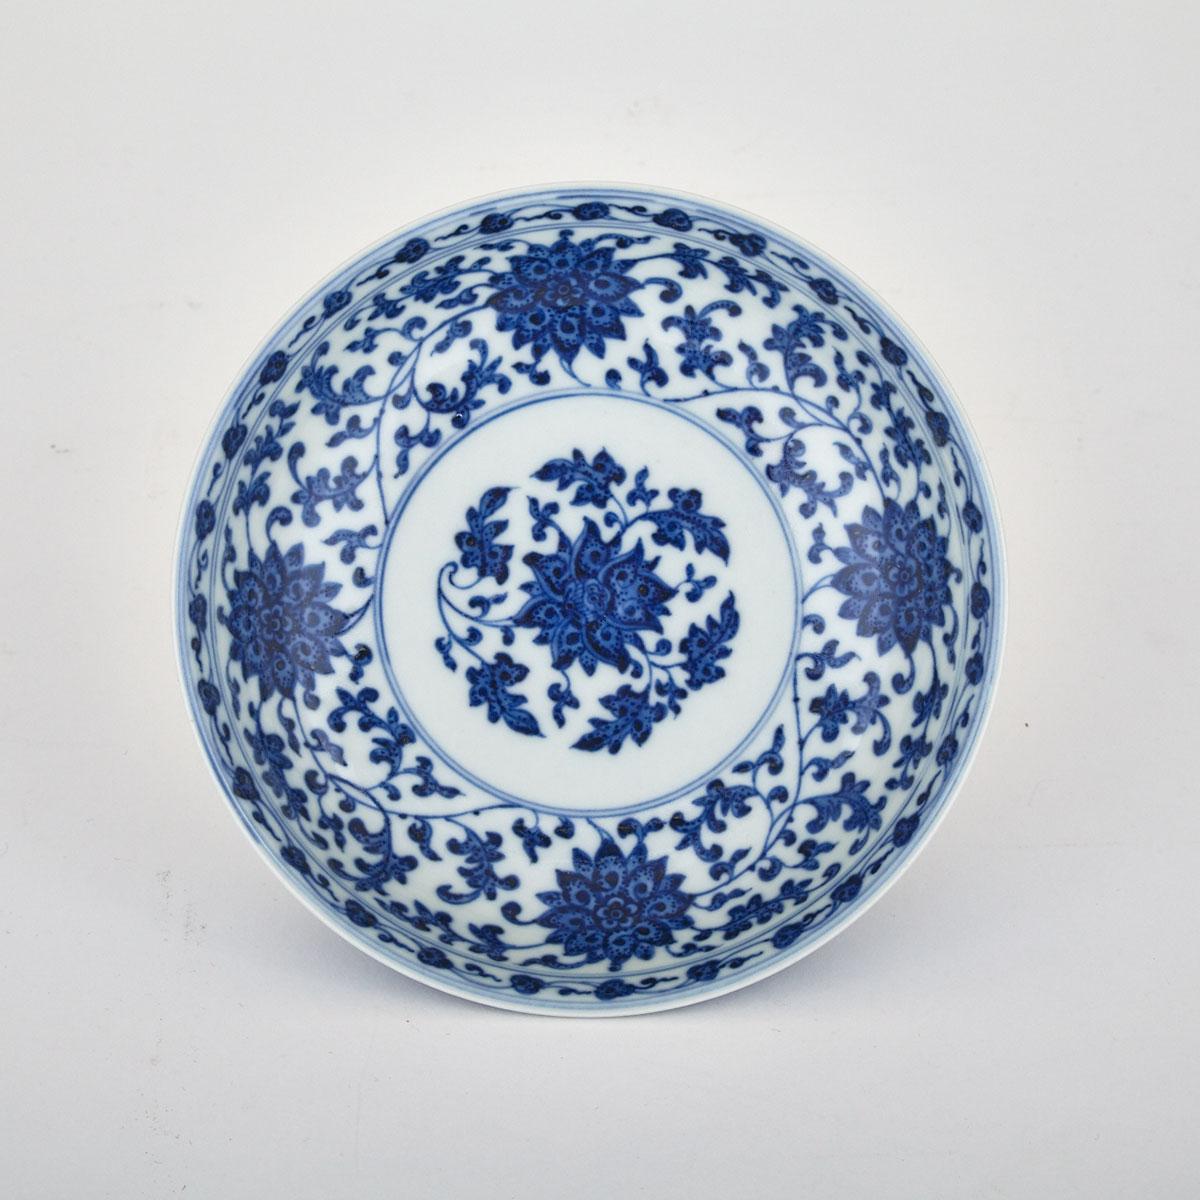 Blue and White High Footed Lotus Dish, Qianlong Mark